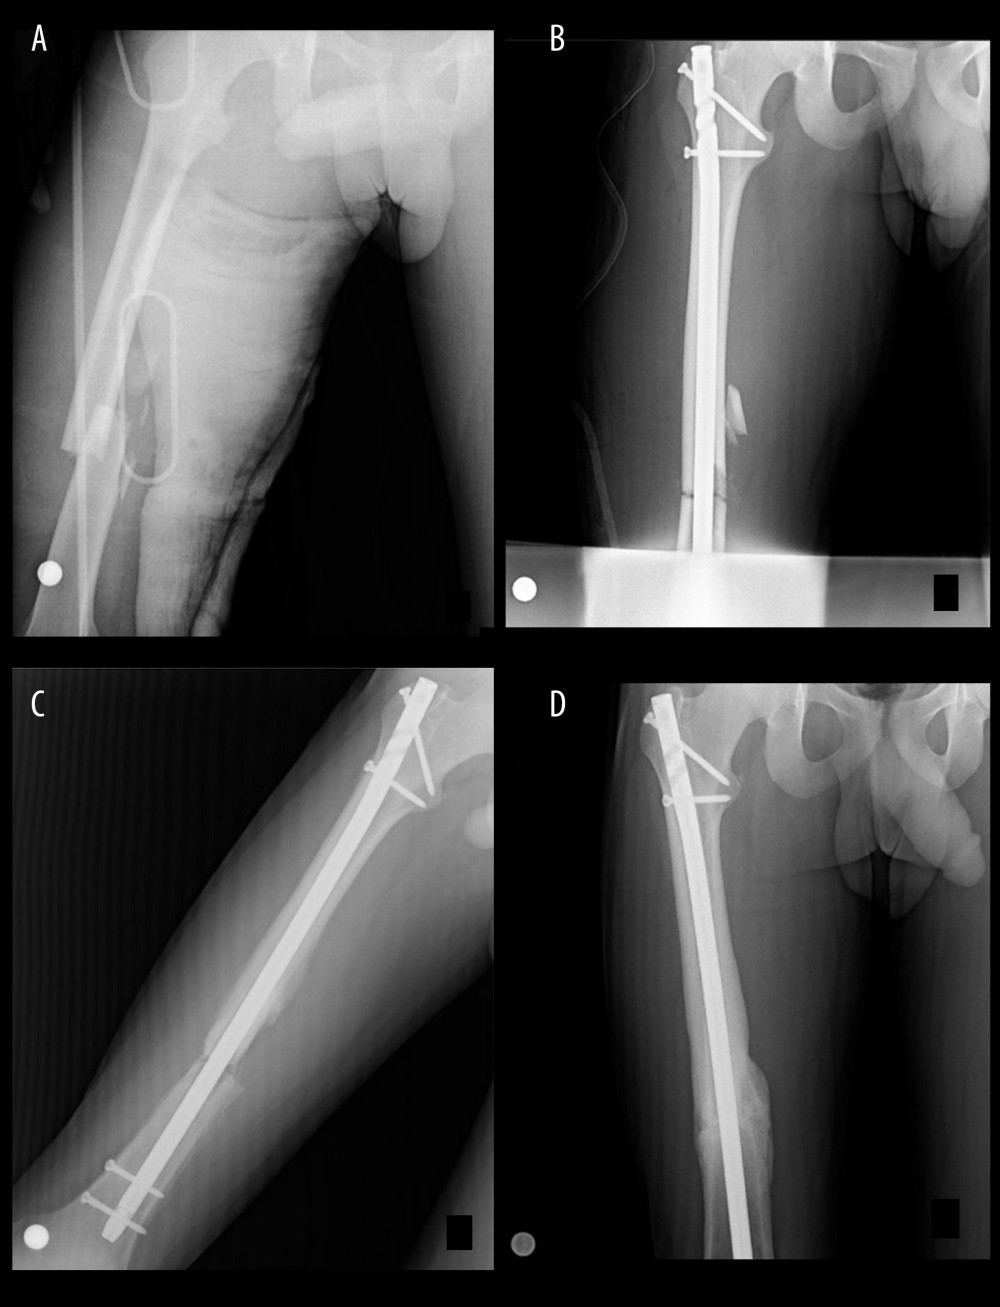 21-year-old male femur fracture A) fracture radiography B) post-operative radiography C) post operative 12th month radiographic ESWT applied D) post-operative 18th month after ESWT application radiograph.